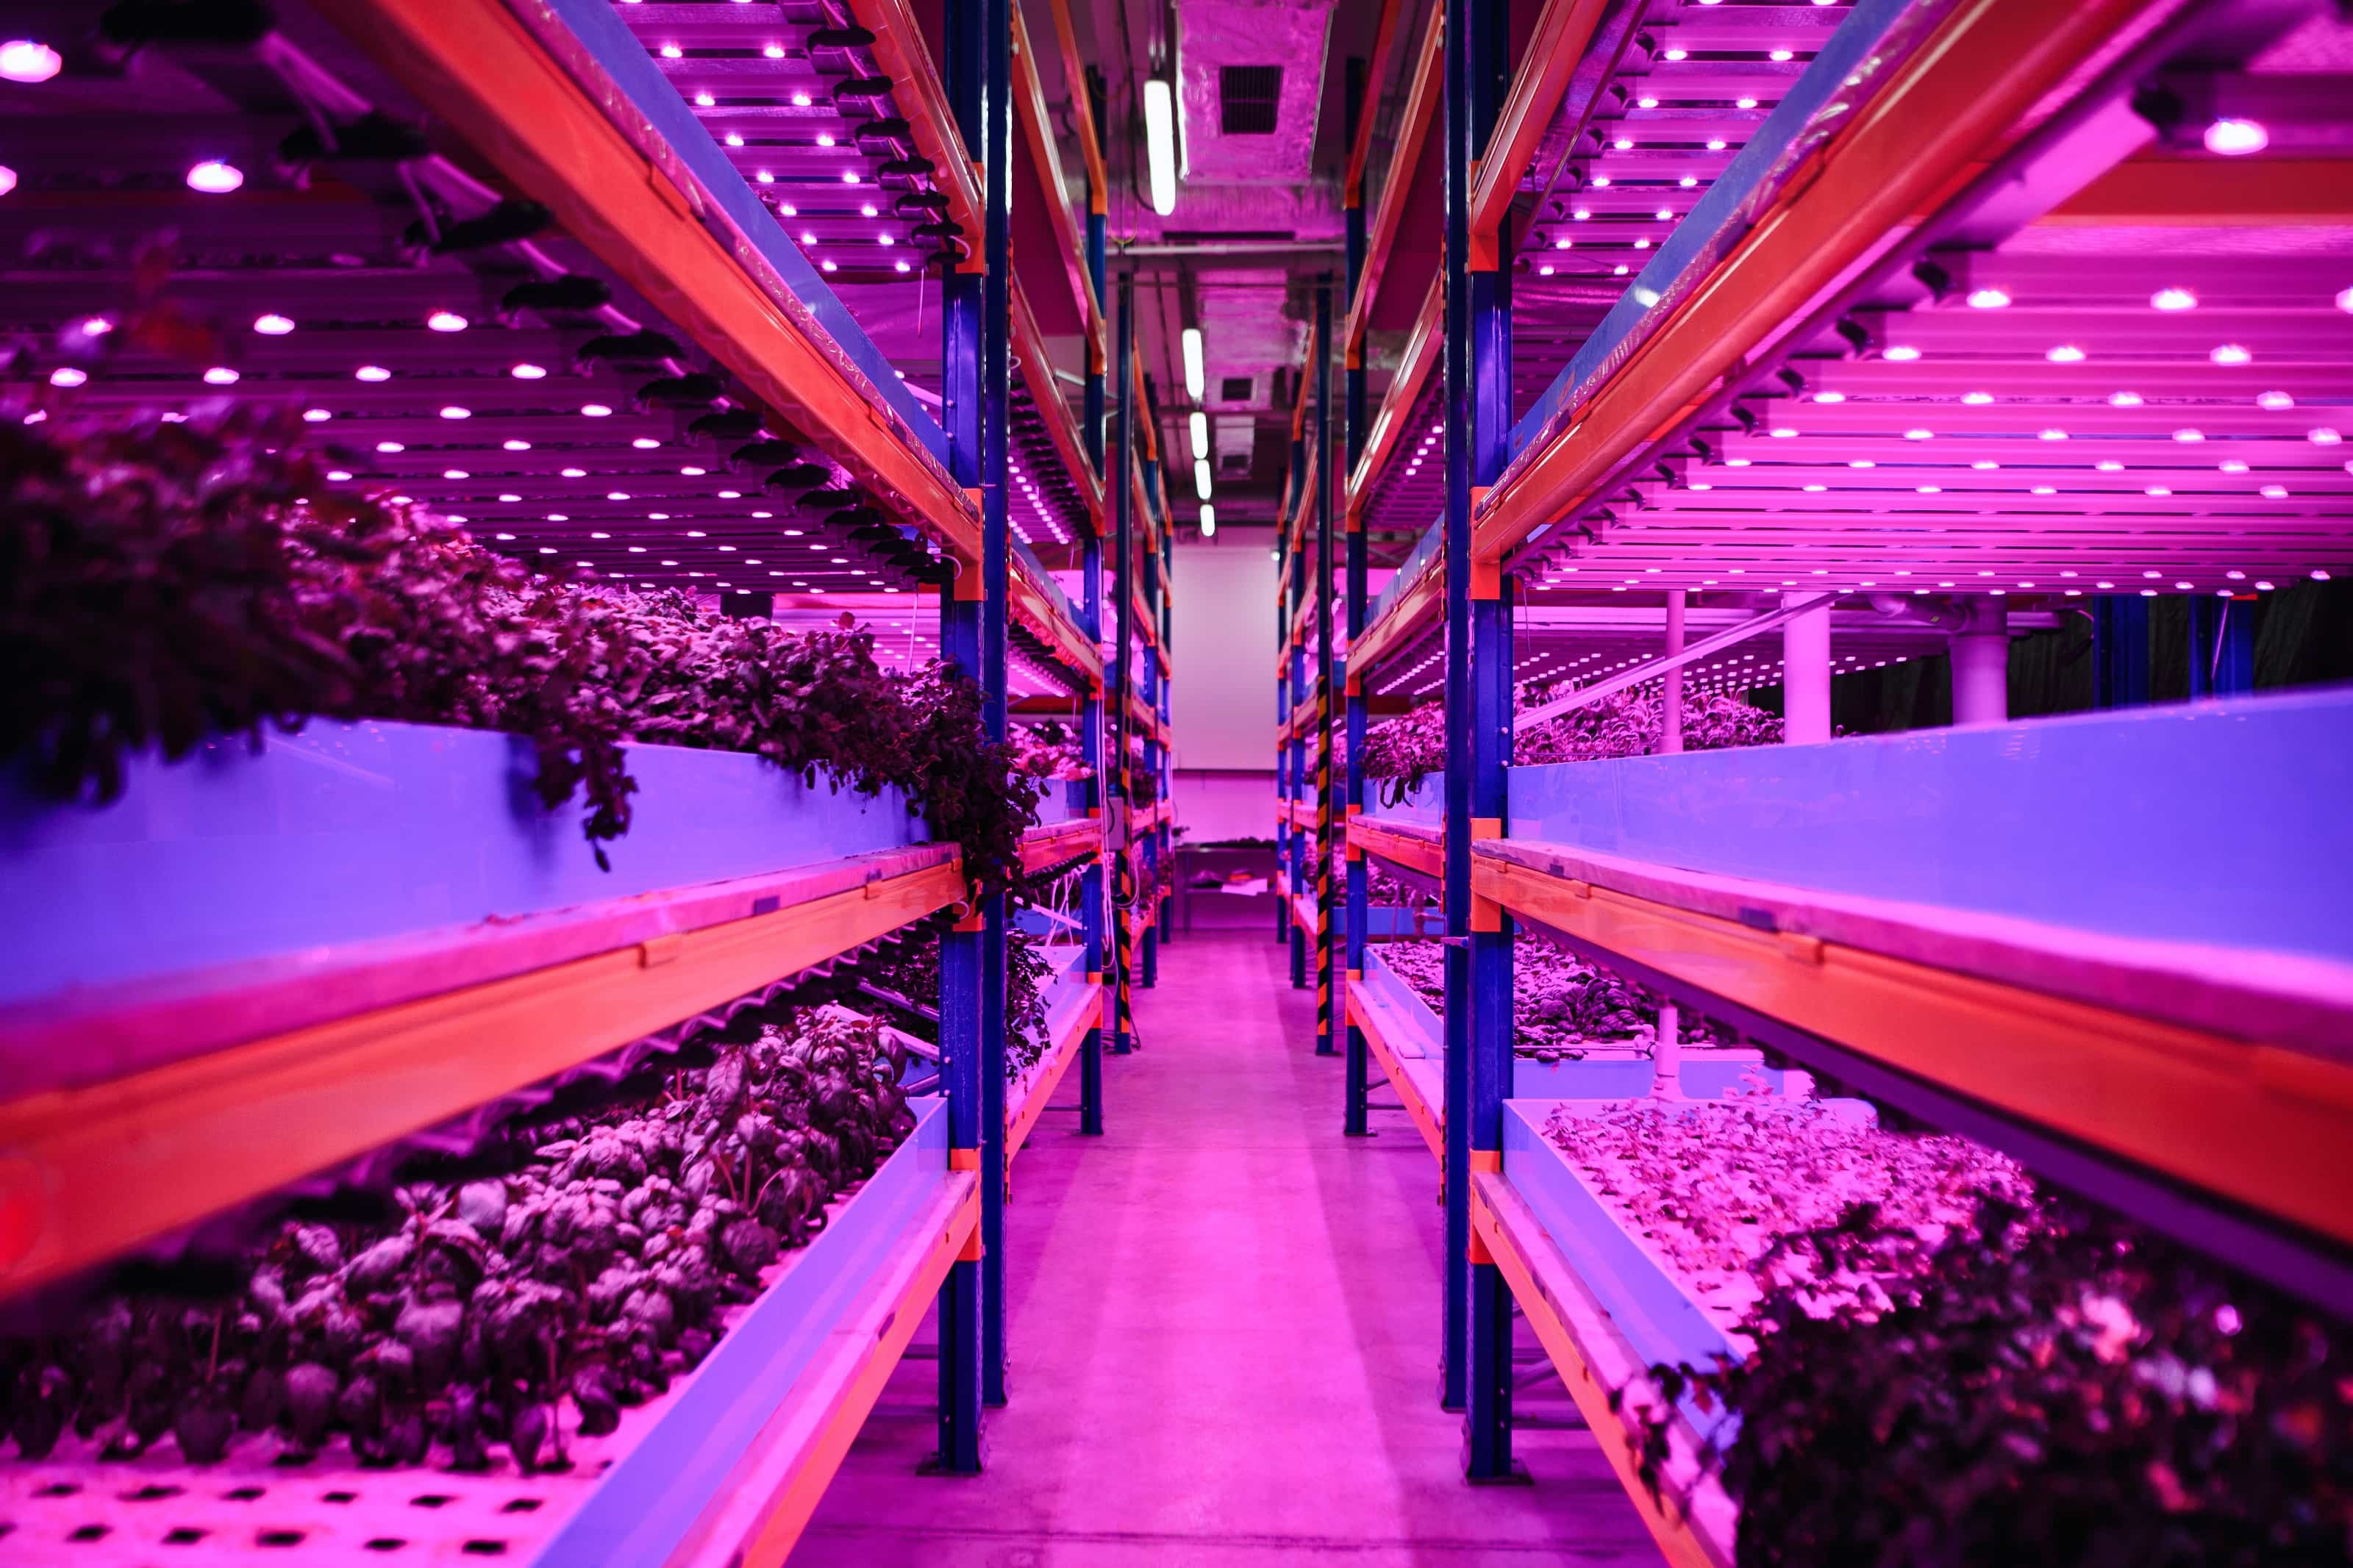 Aquaponic farm, sustainable business and artificial lighting